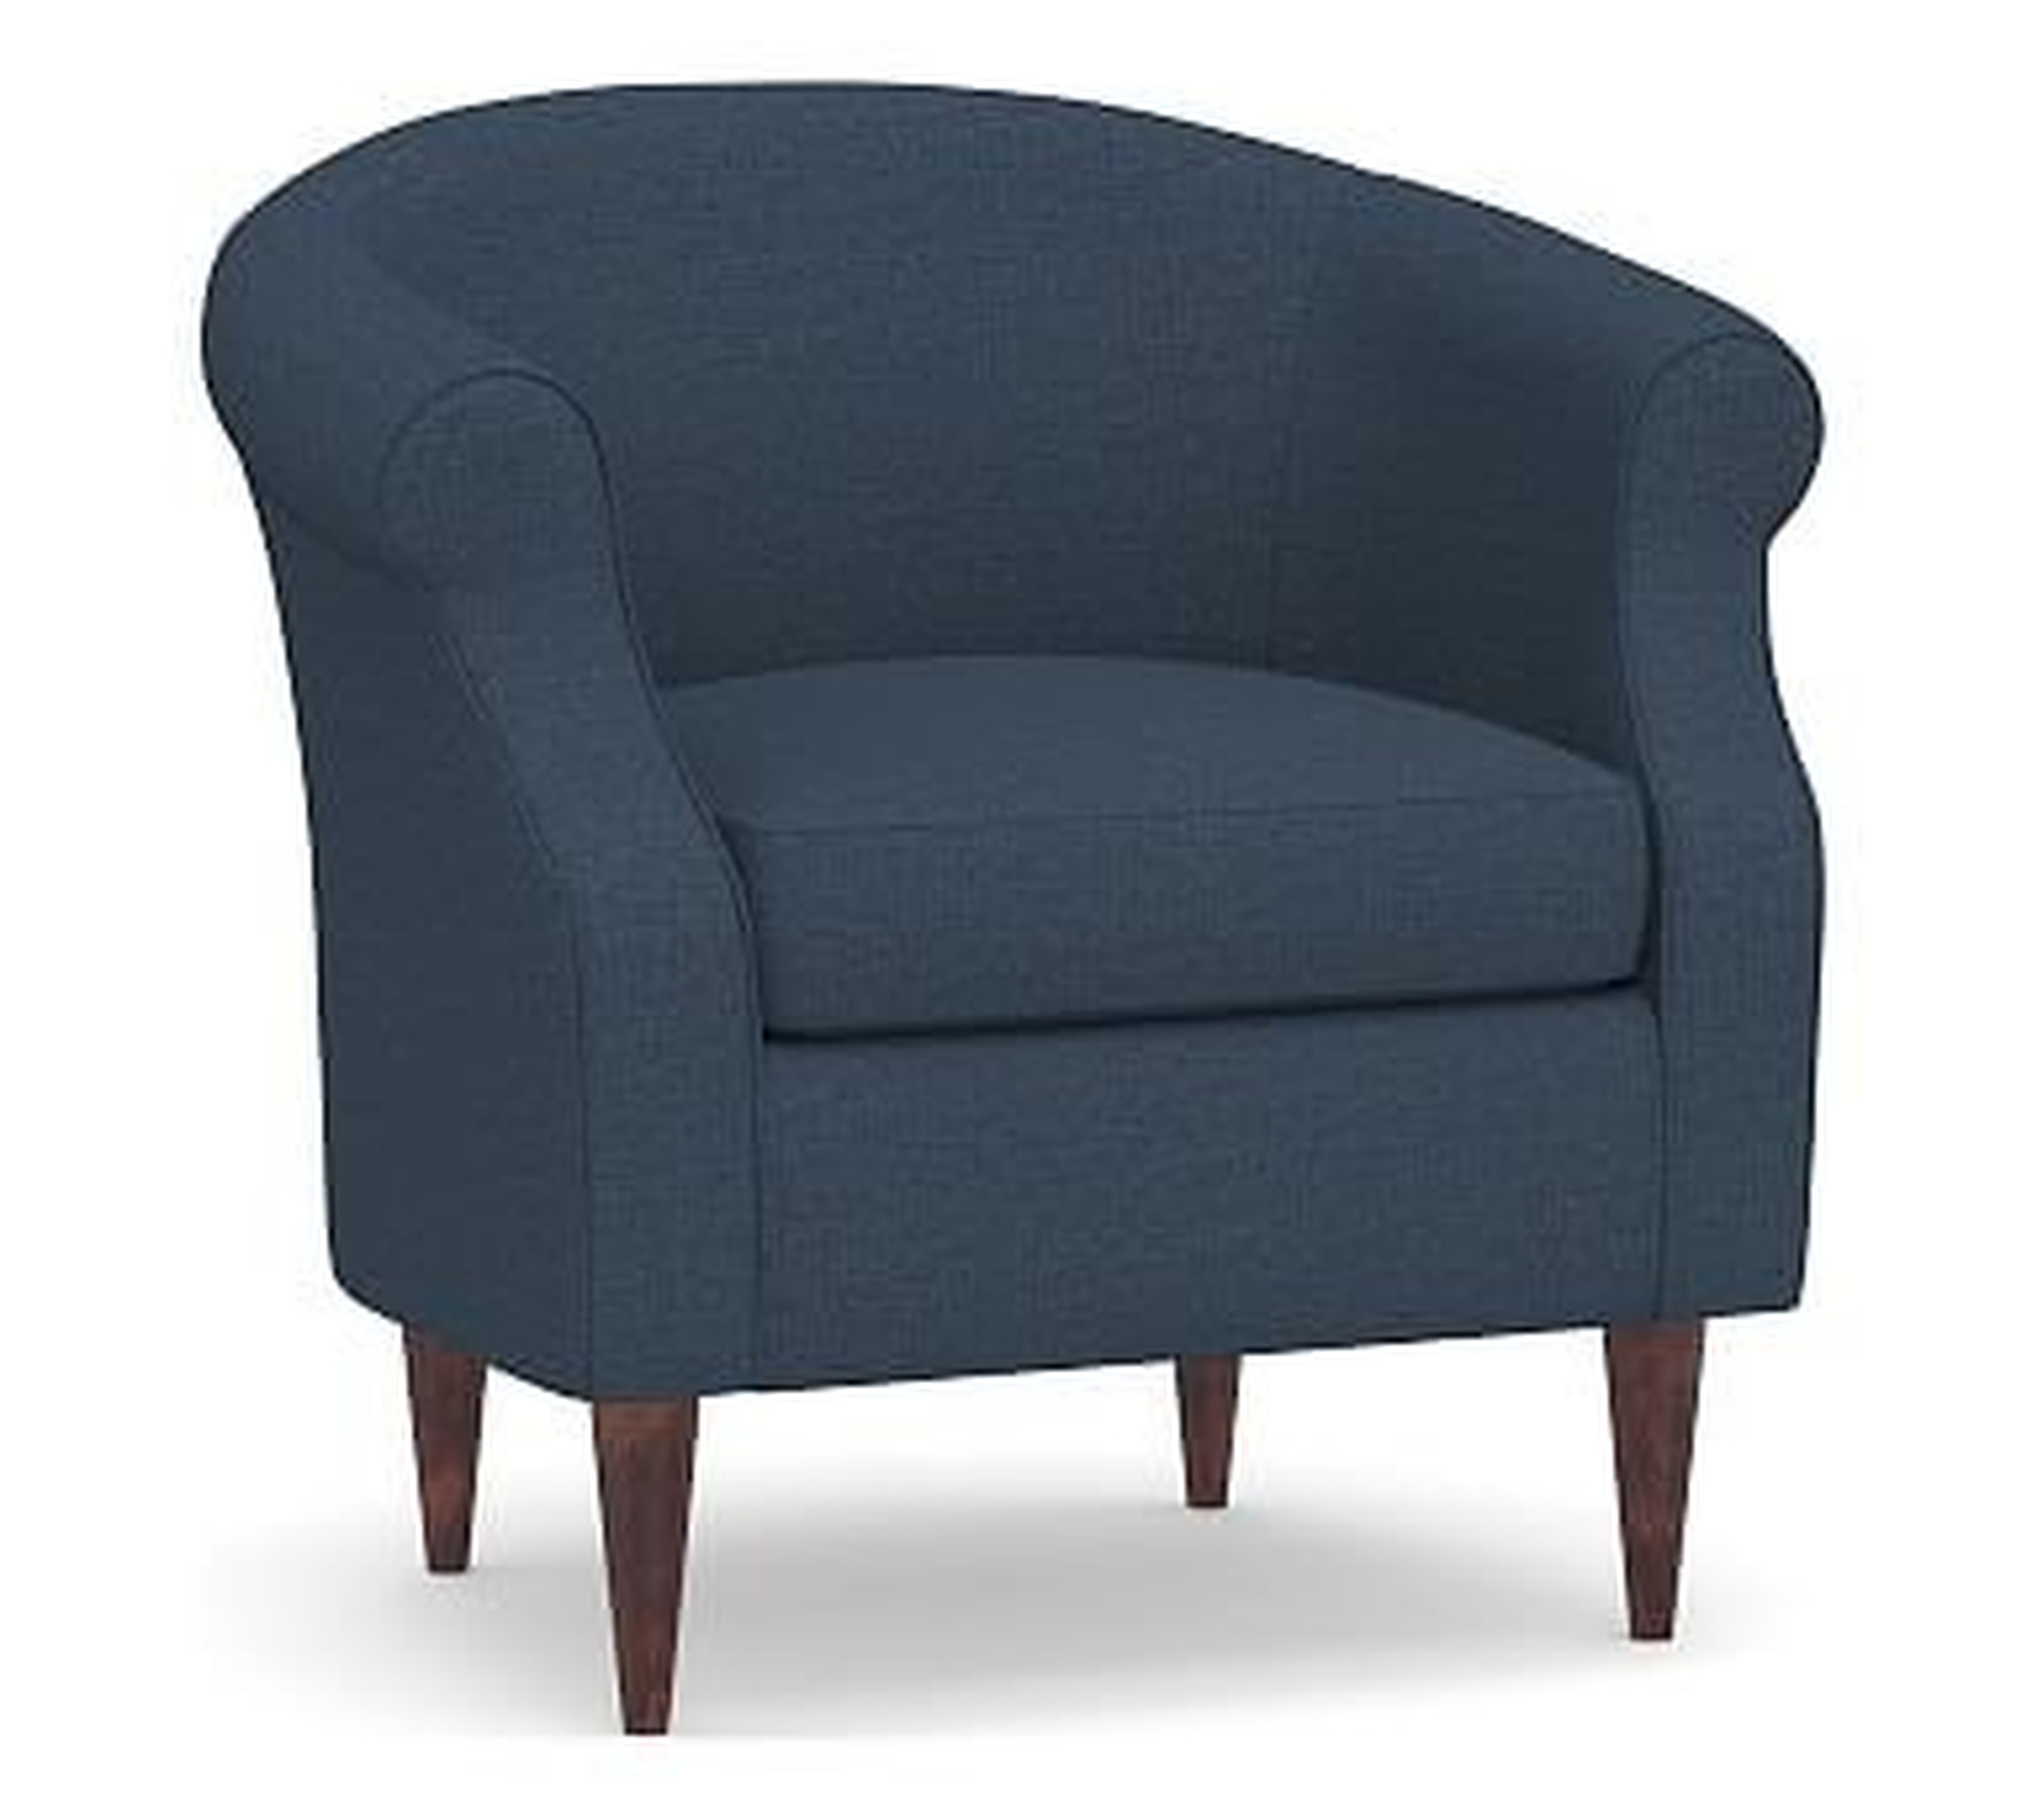 SoMa Lyndon Upholstered Armchair, Polyester Wrapped Cushions, Brushed Crossweave Navy - Pottery Barn